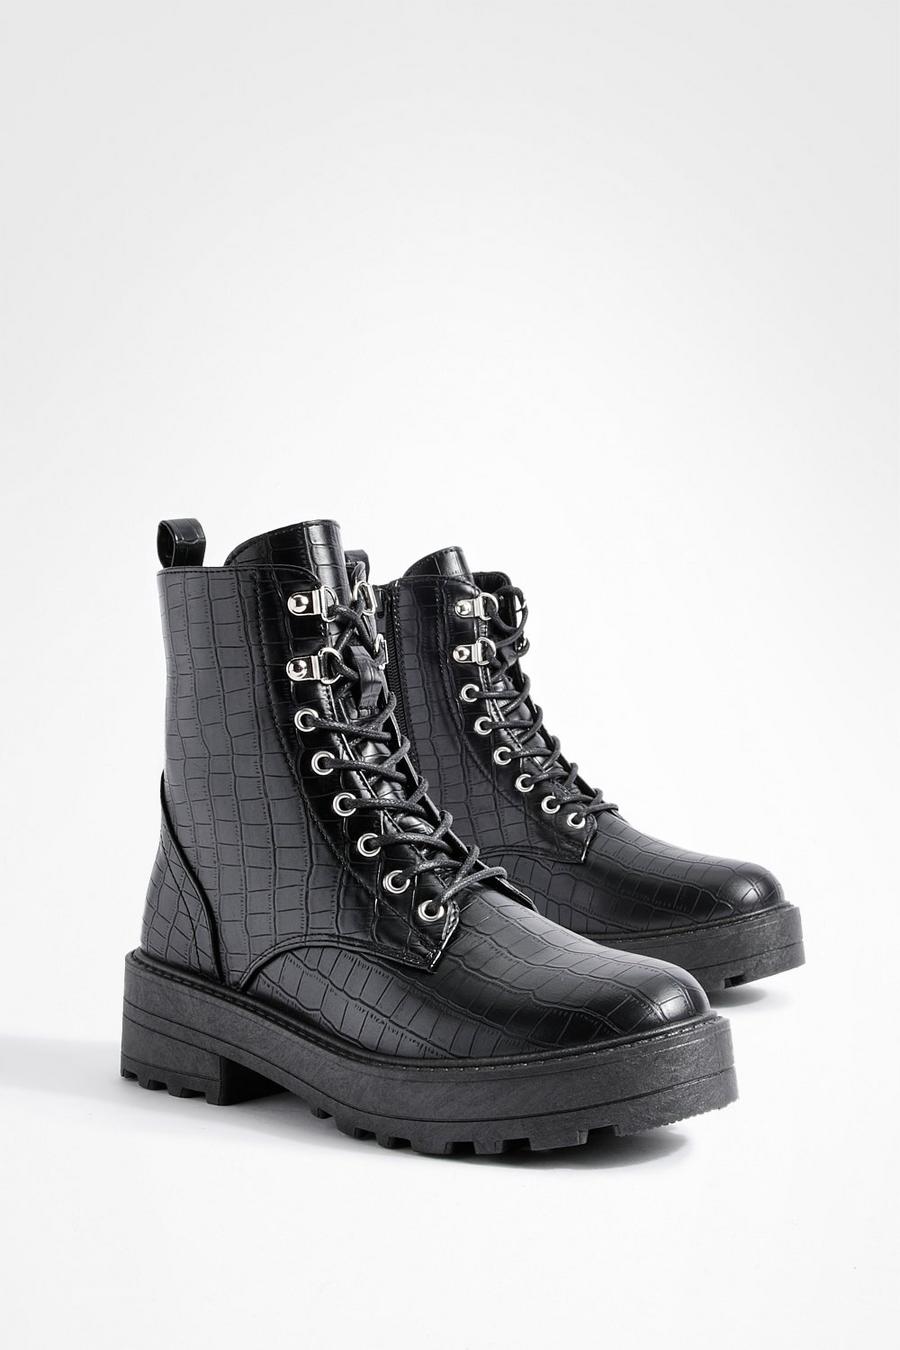 Black Croc Lace Up Chunky Combat Boots image number 1